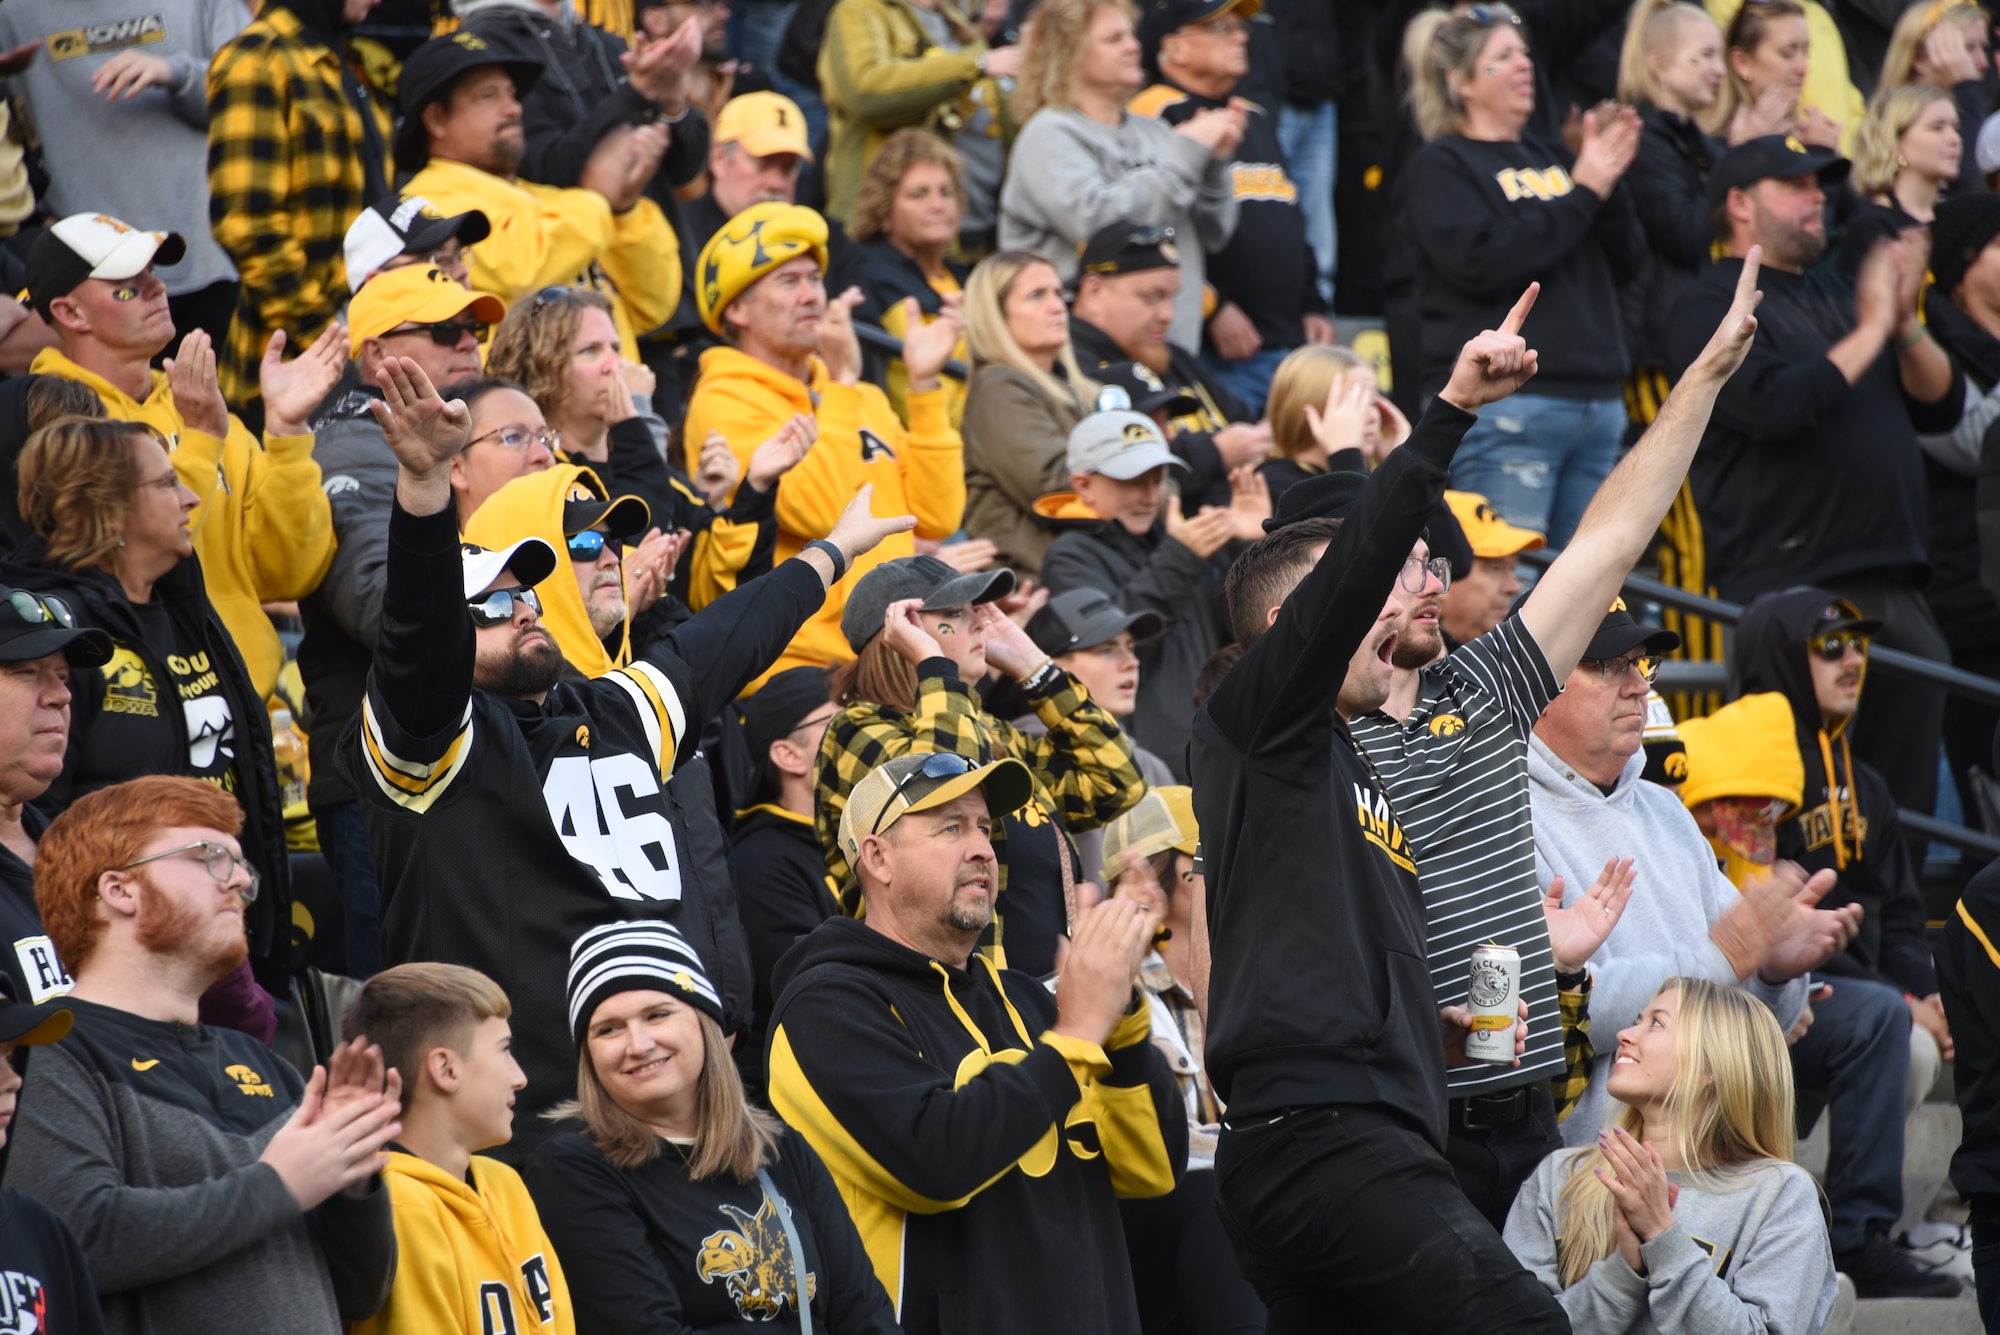 Fans fill the Kinnick Stadium at the University of Iowa in Iowa City to watch the Iowa vs Perdue football game.